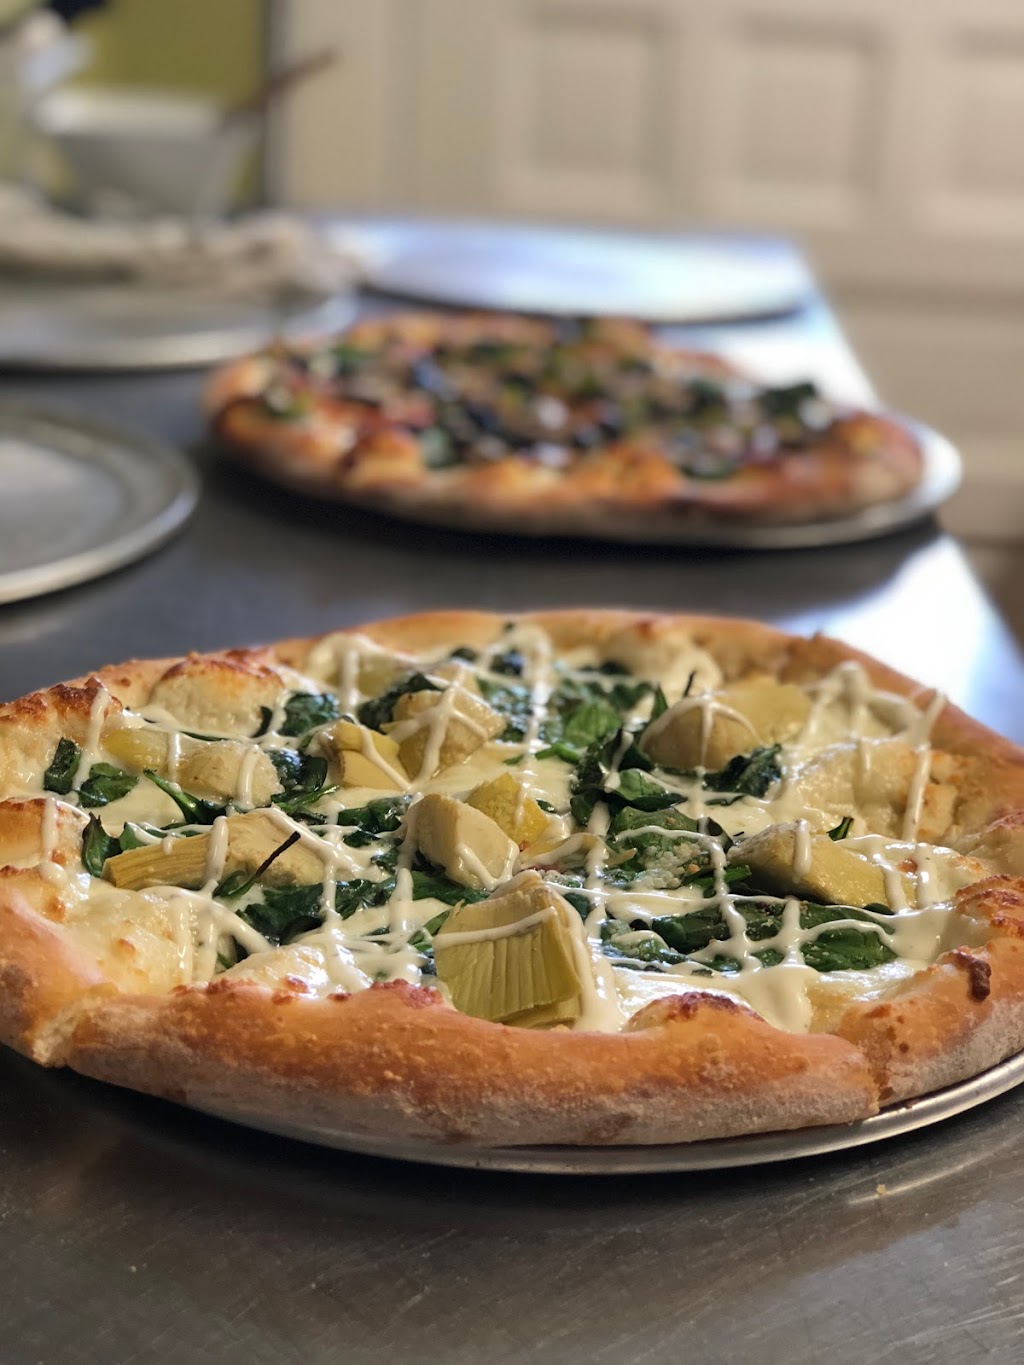 Plank Road Pizza | 5212 State Rte N, Cottleville, MO 63304, USA | Phone: (636) 477-6154